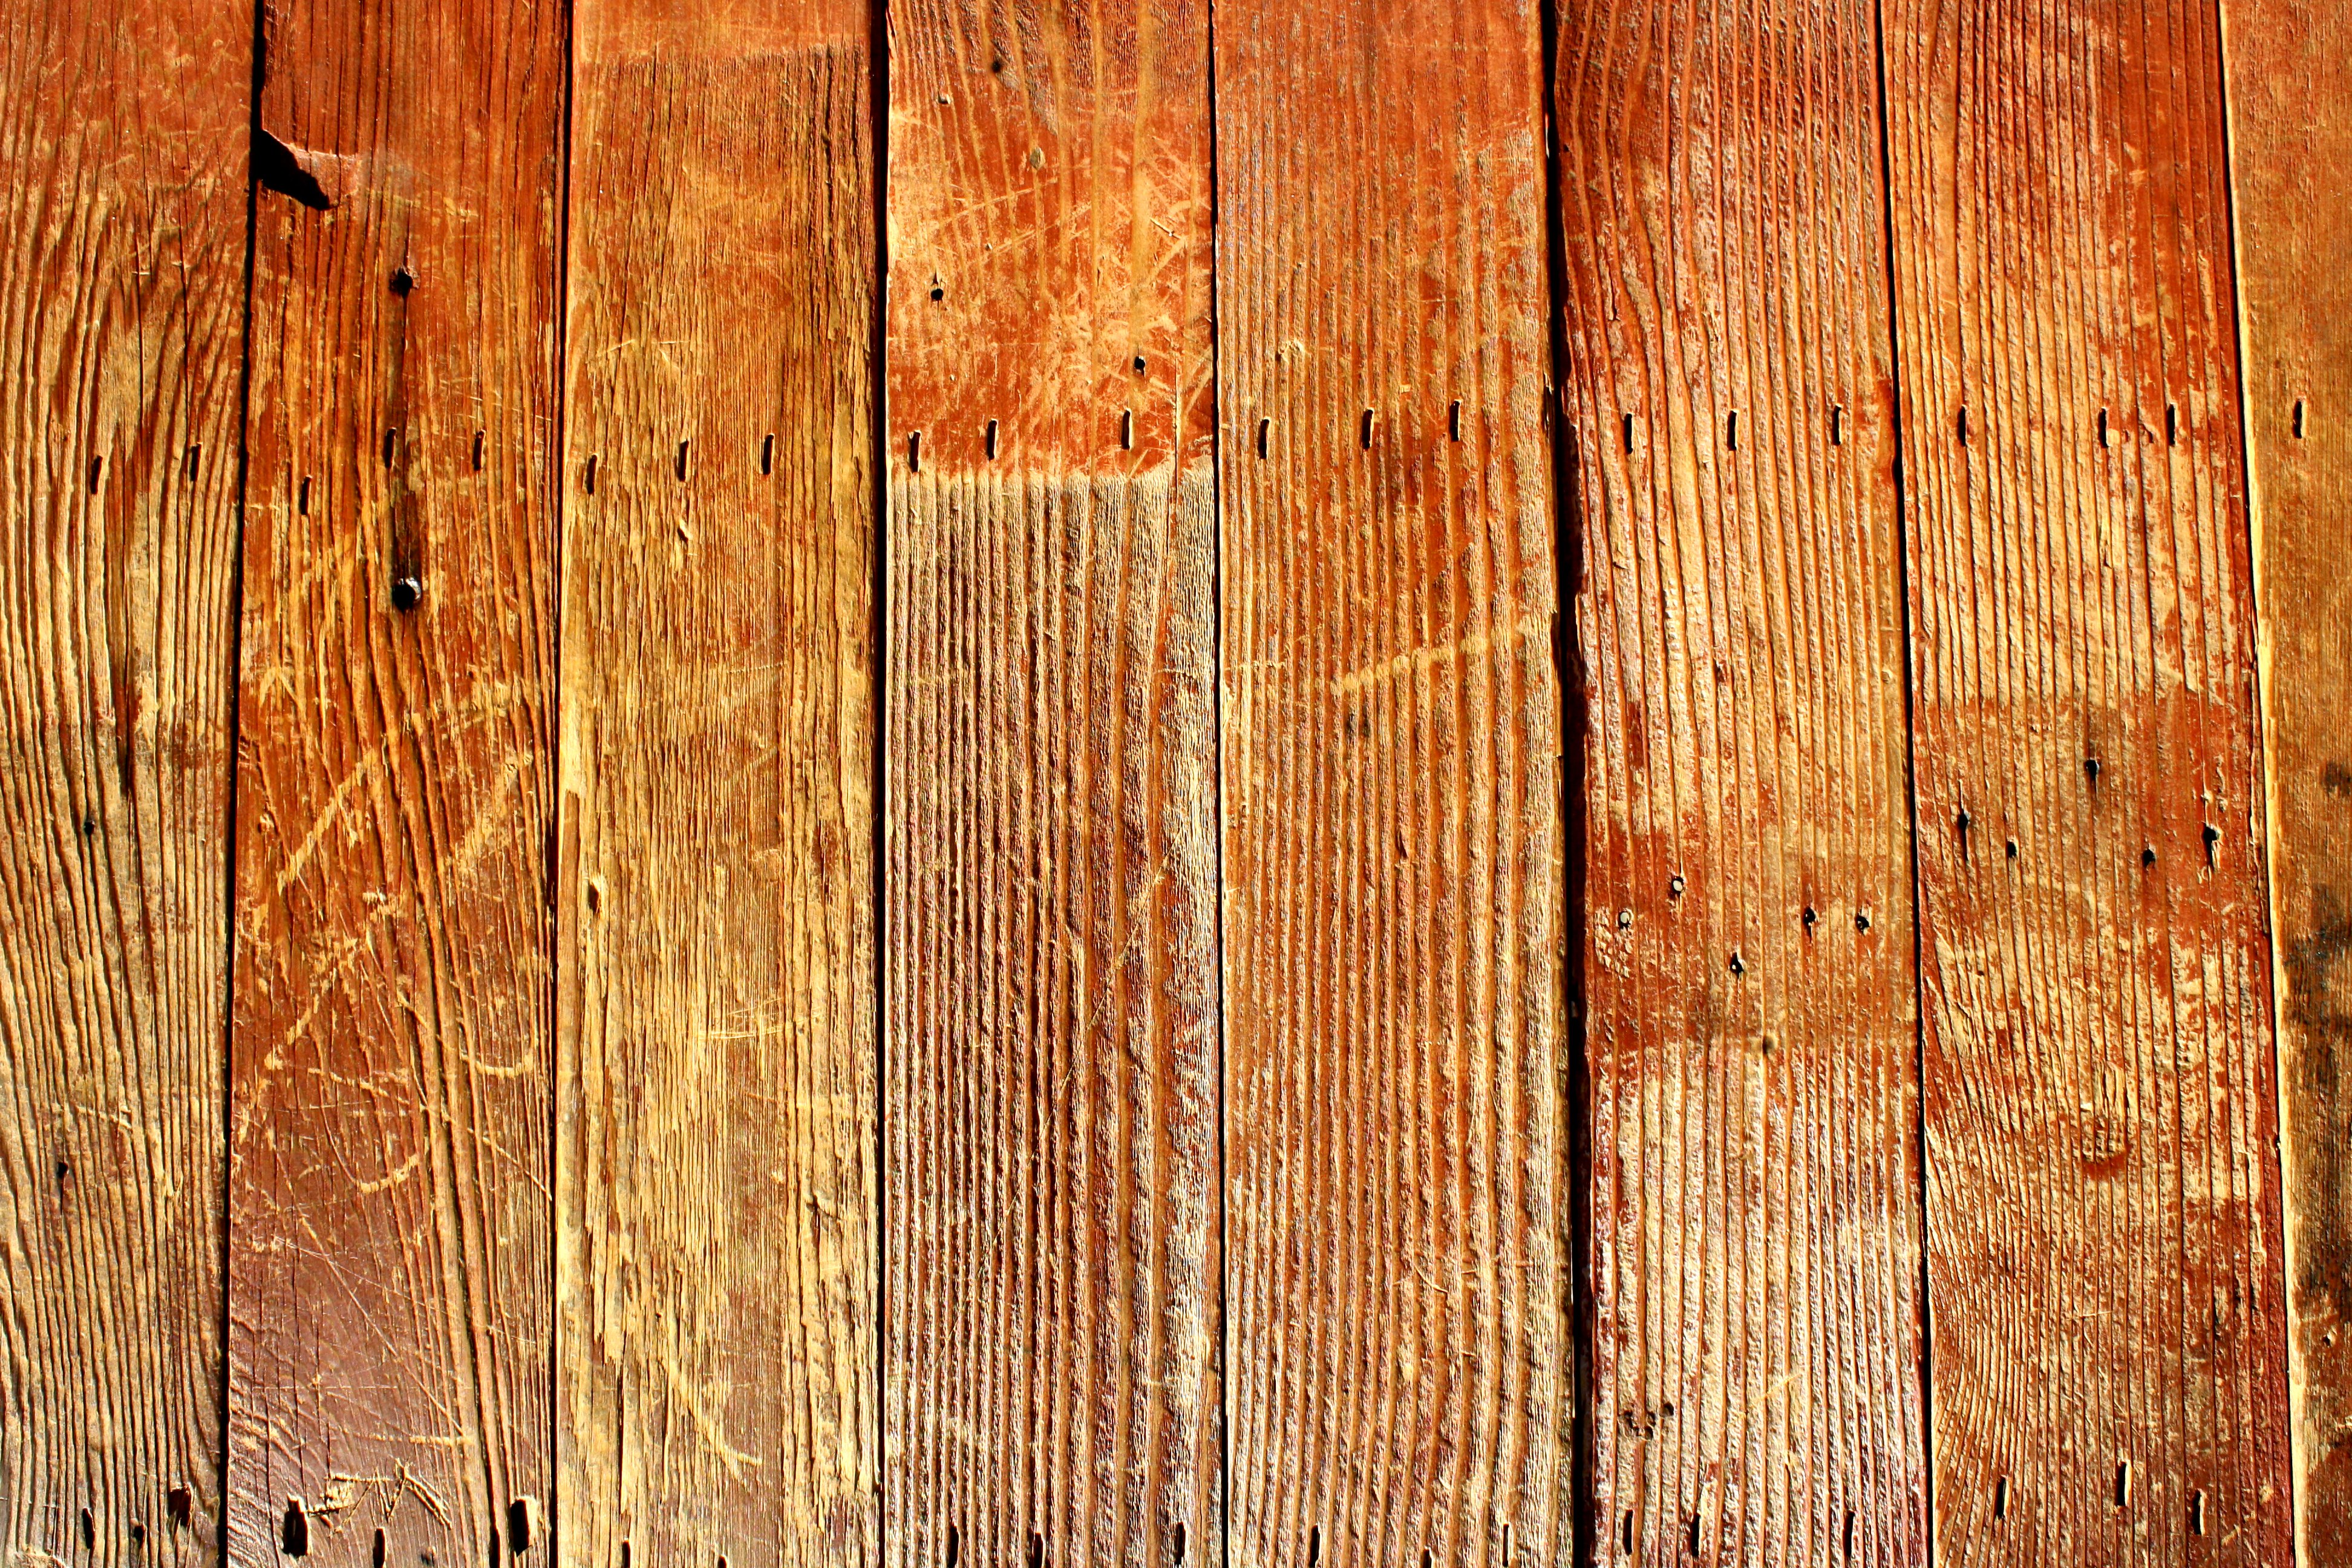 Scratched Old Wooden Boards Texture Picture Photograph Photos